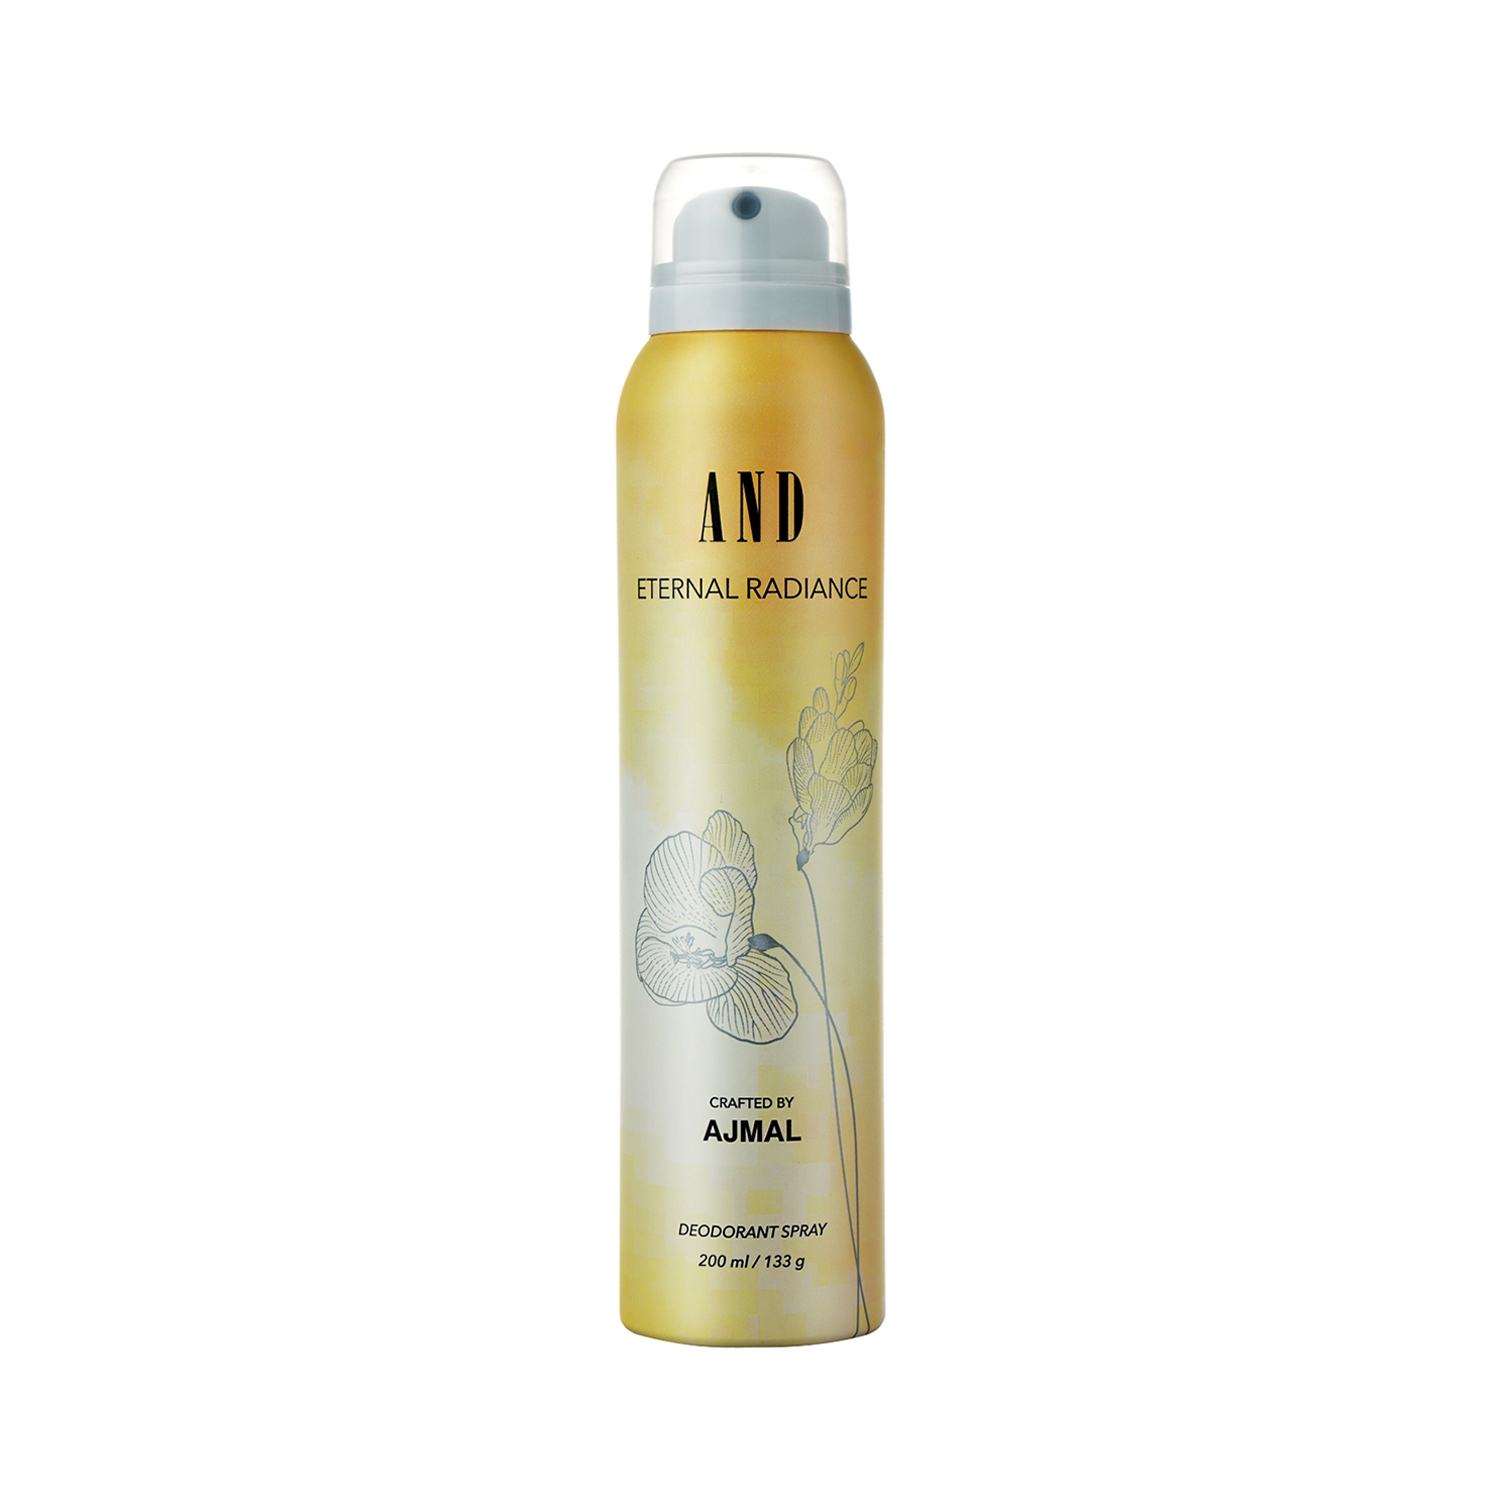 AND | AND Eternal Radiance Deodorant Body Spray Gift for Women (200ml)